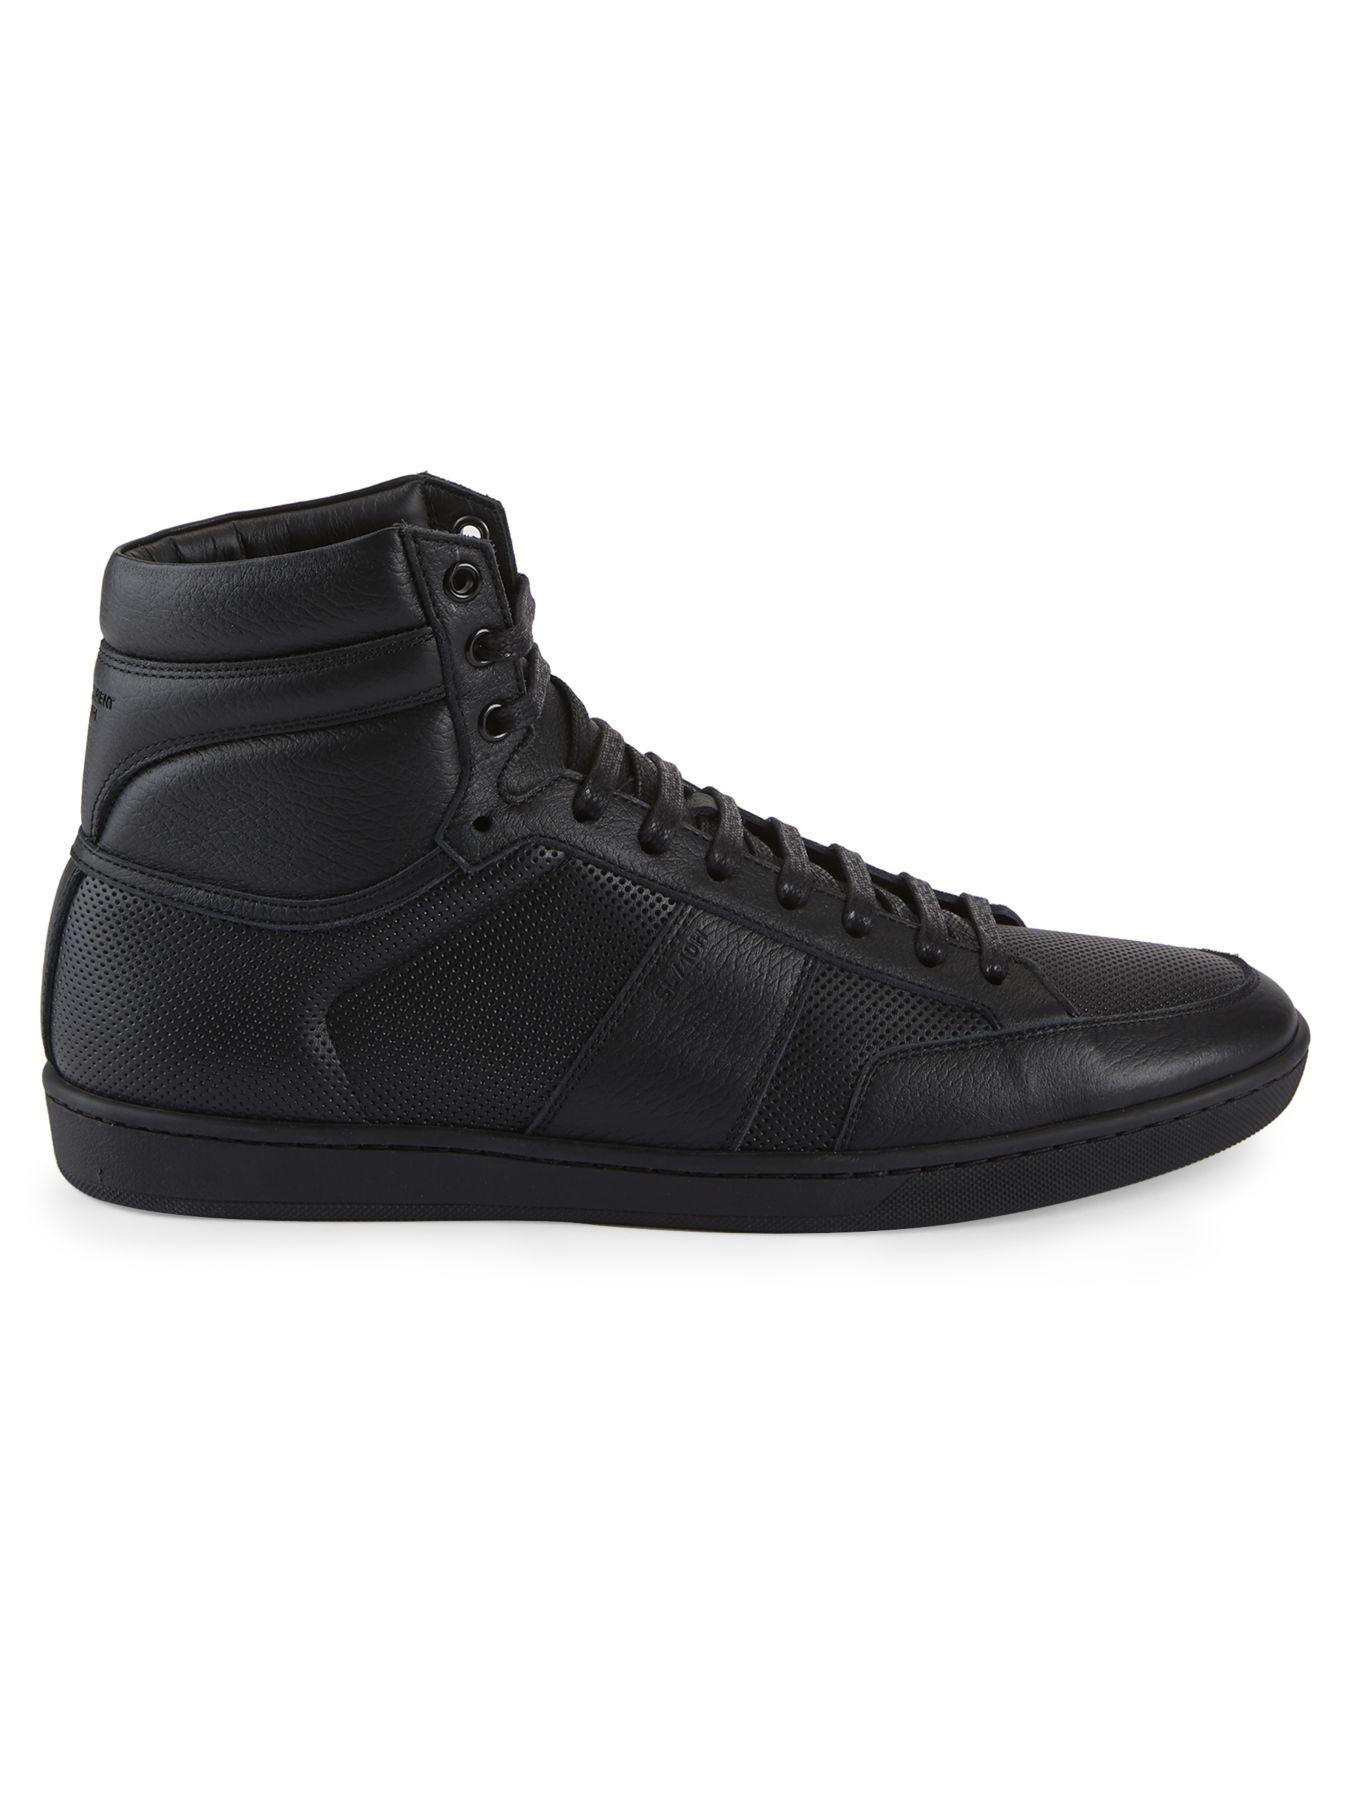 Saint Laurent Leather High Top Sneakers in Black for Men - Lyst